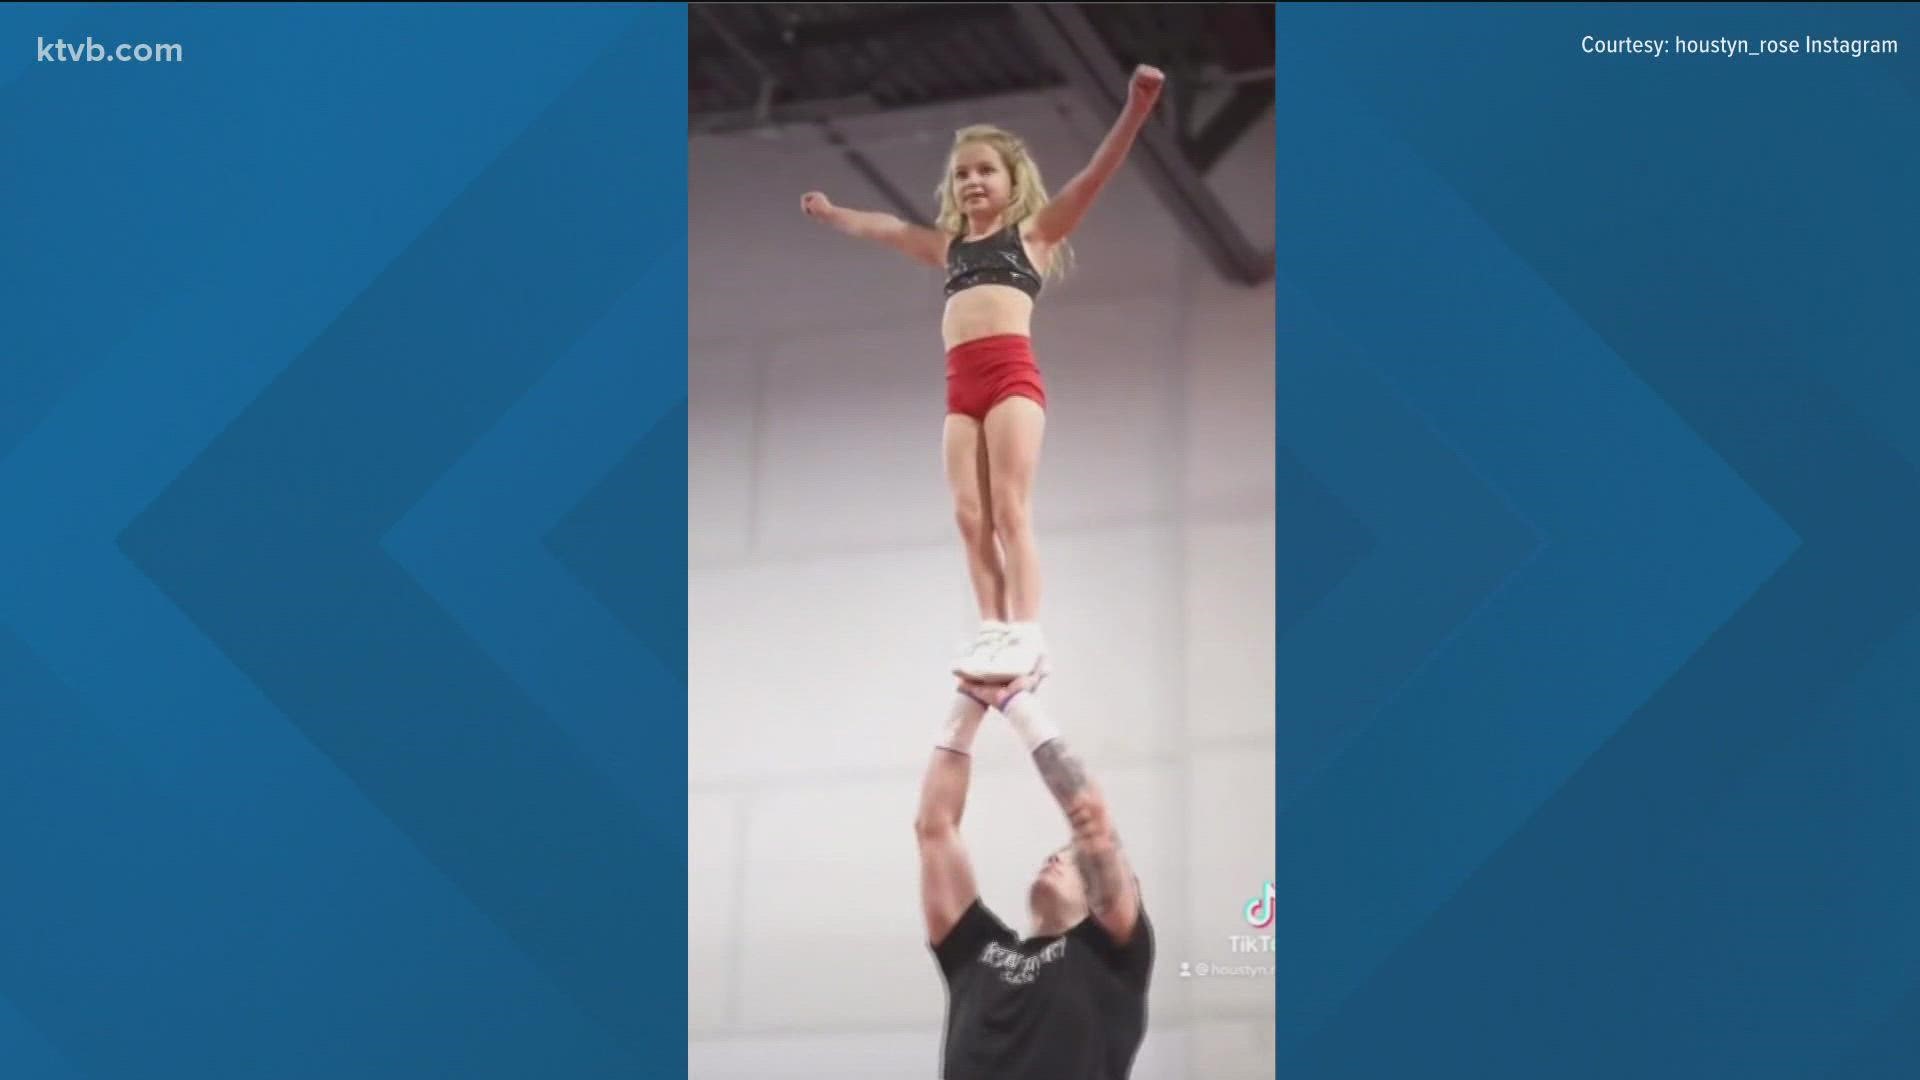 Rose is already performing professional-level stunts with Weber State, the No. 1 cheer team in the U.S. She will learn her America's Got Talent fate next month.